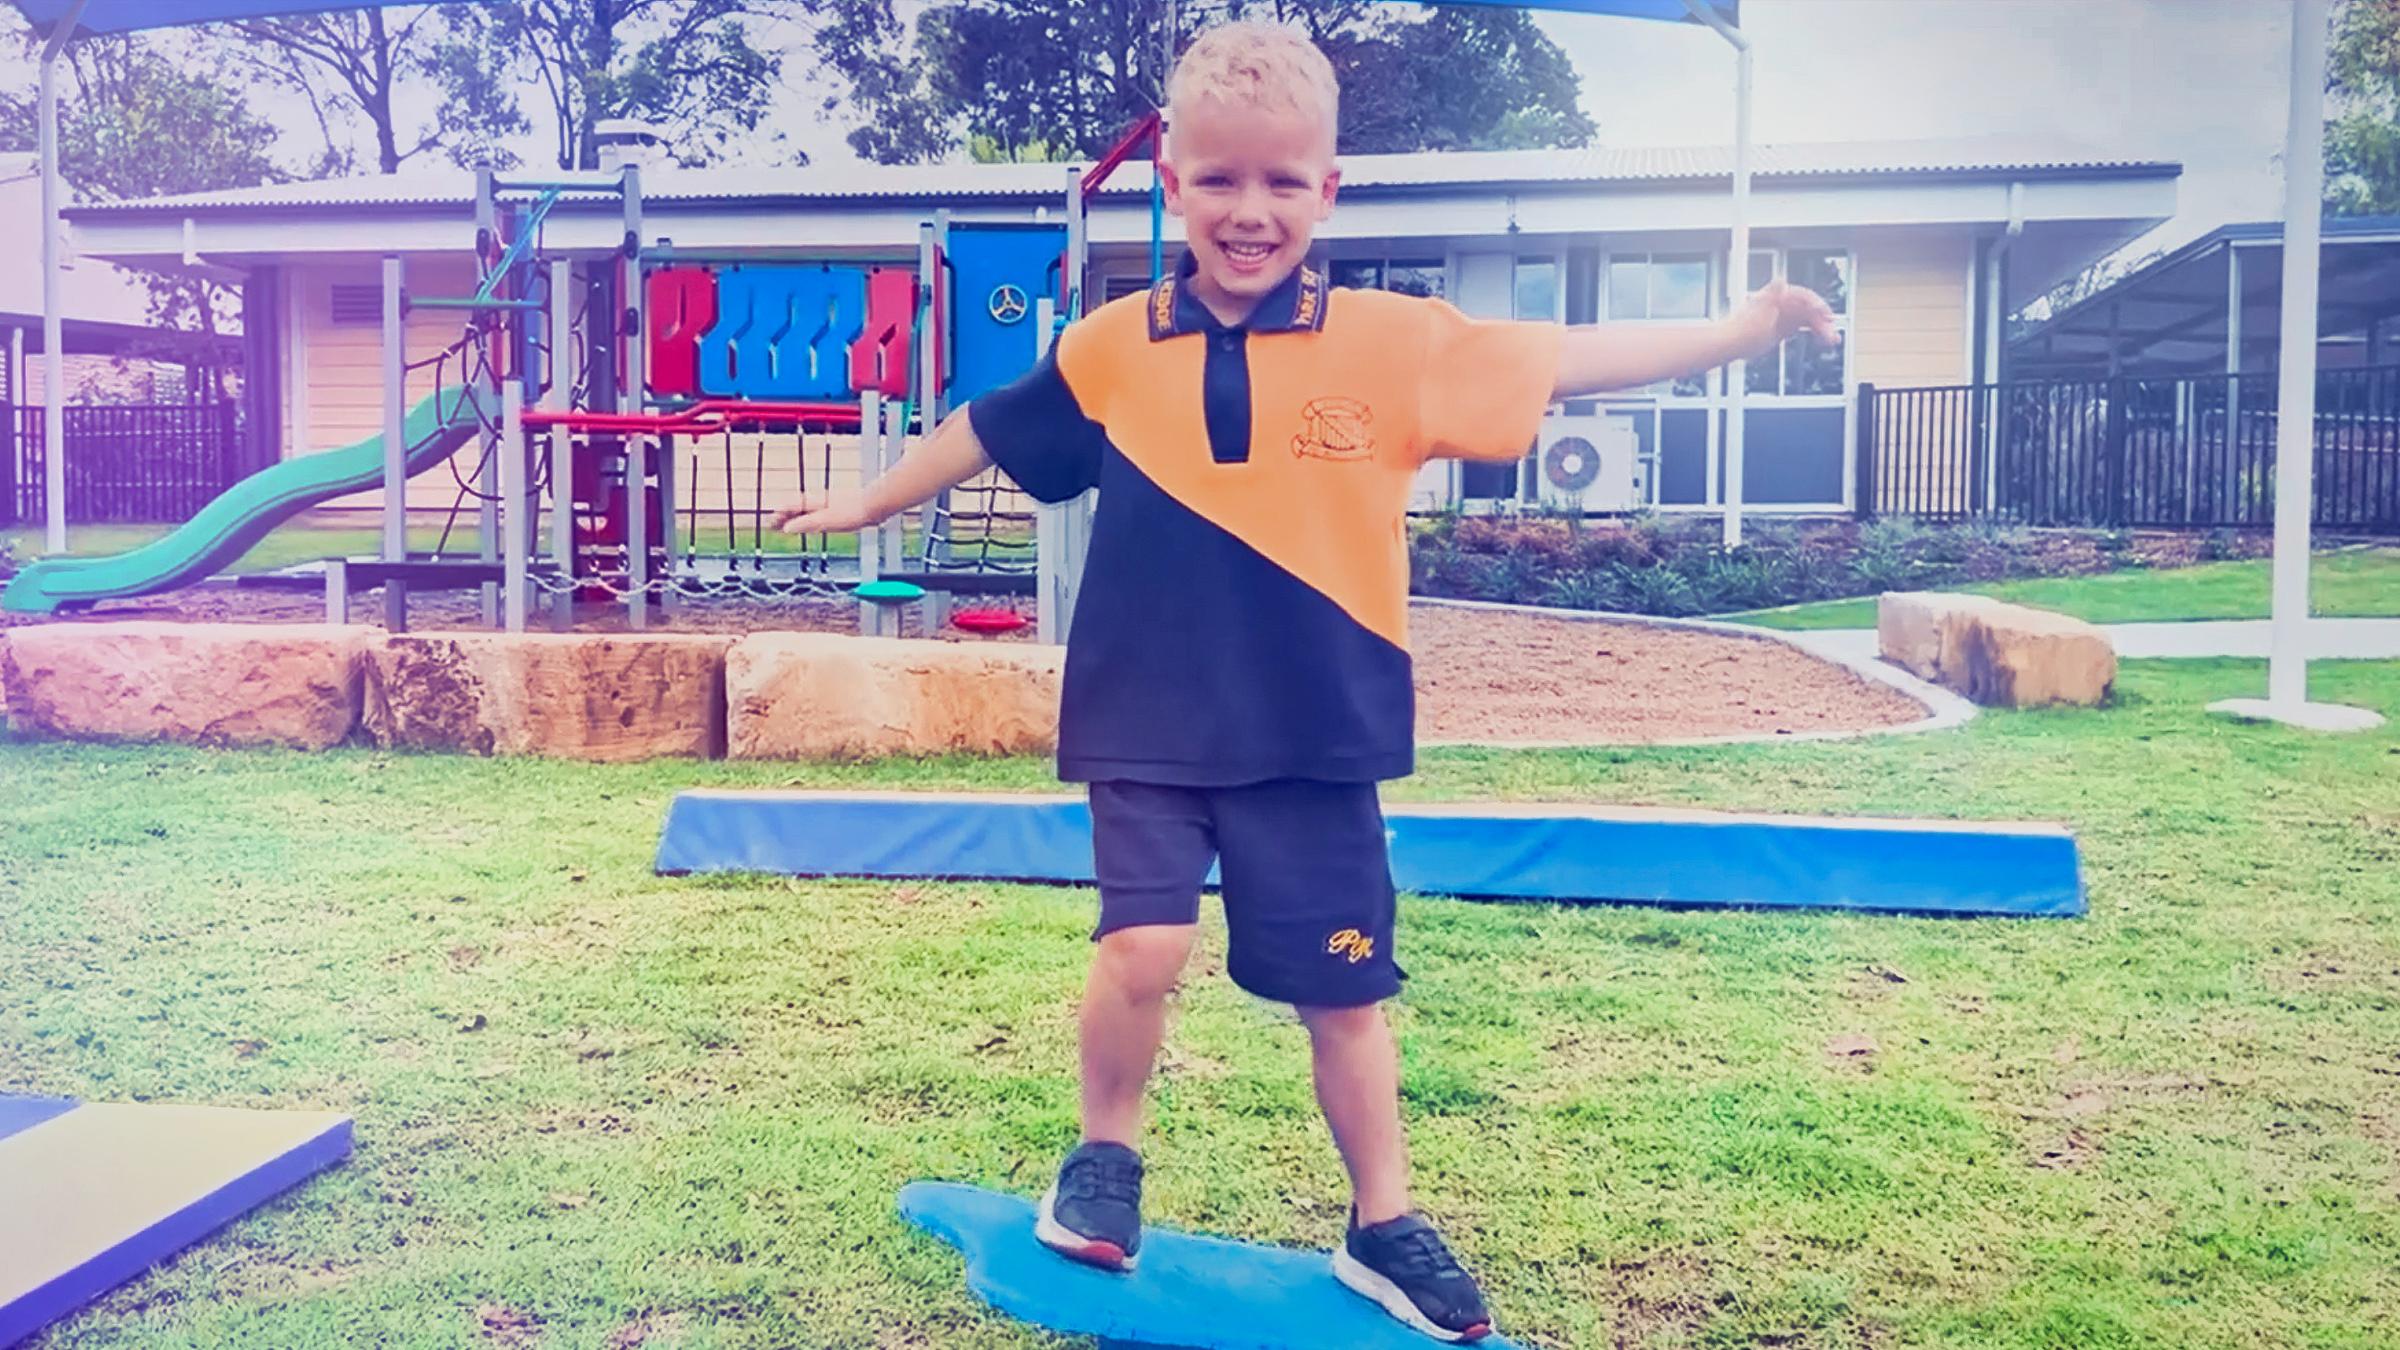 A young boy is standing on equipment in a school playground. 